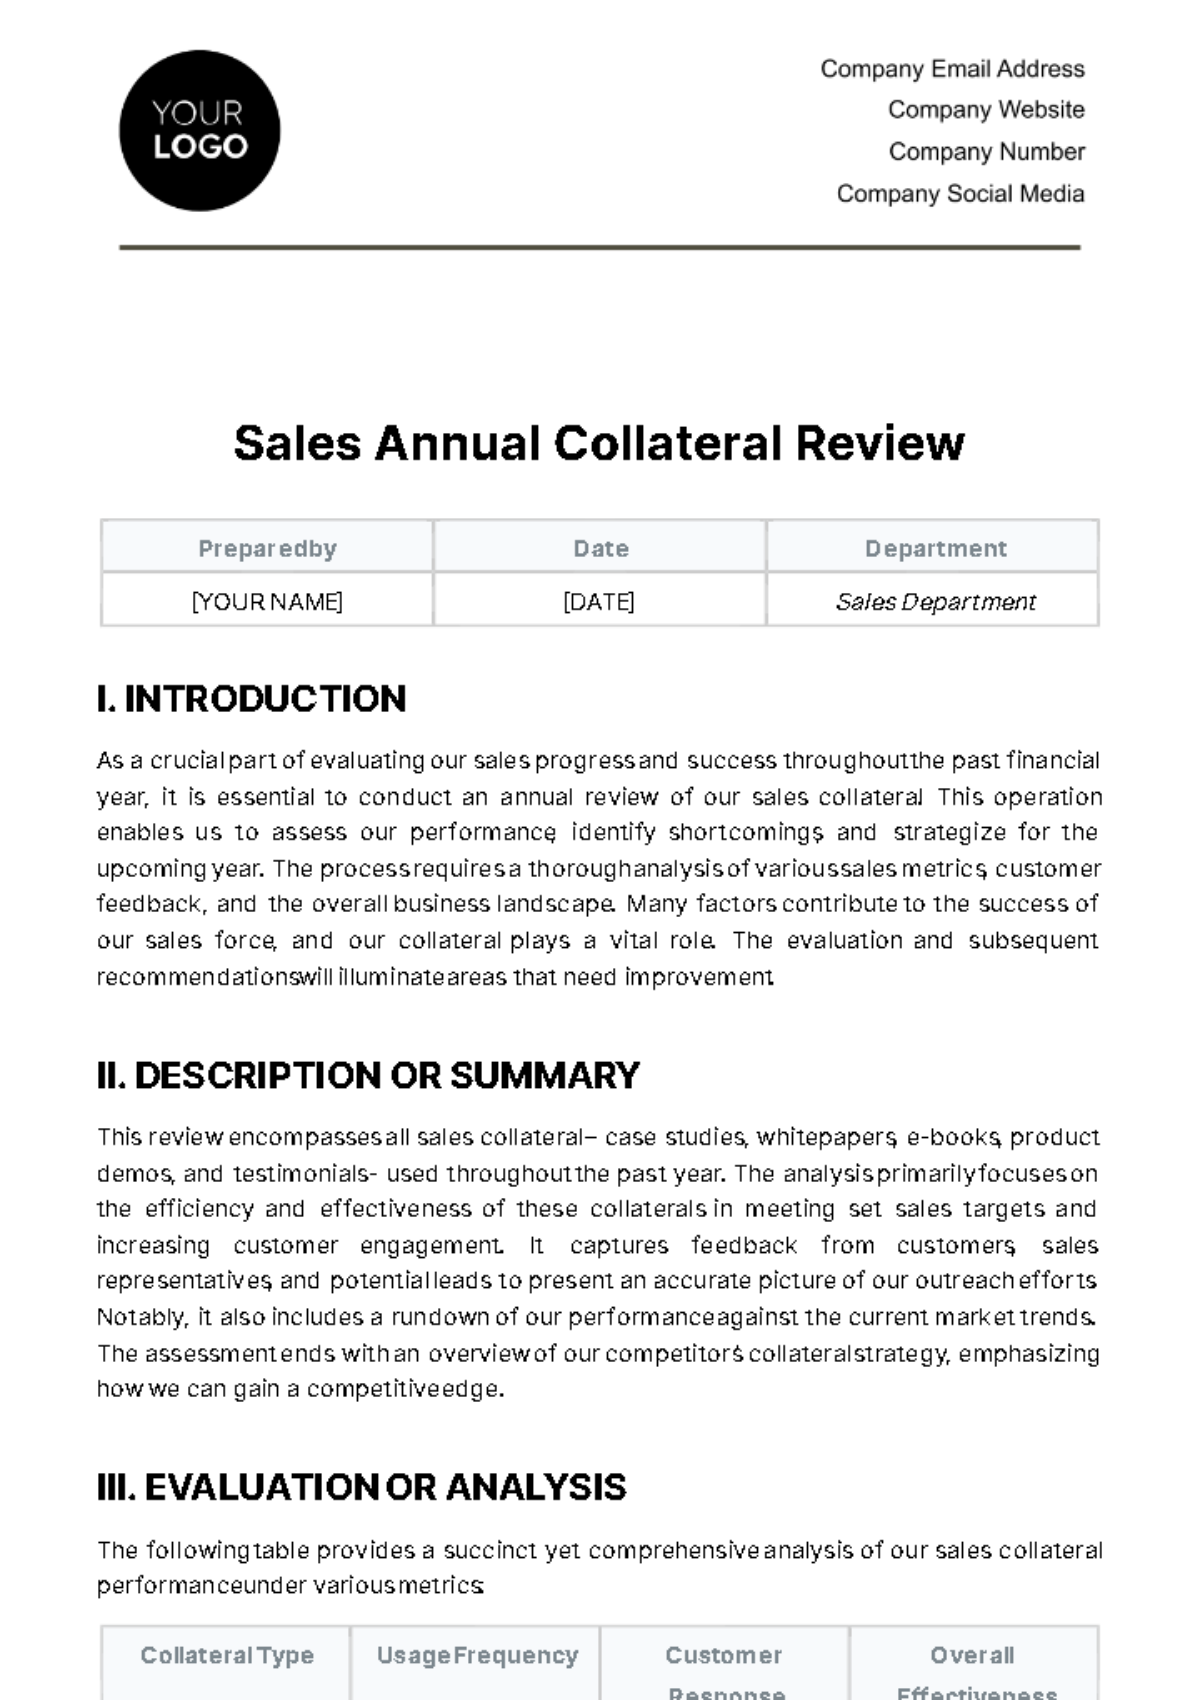 Sales Annual Collateral Review Template